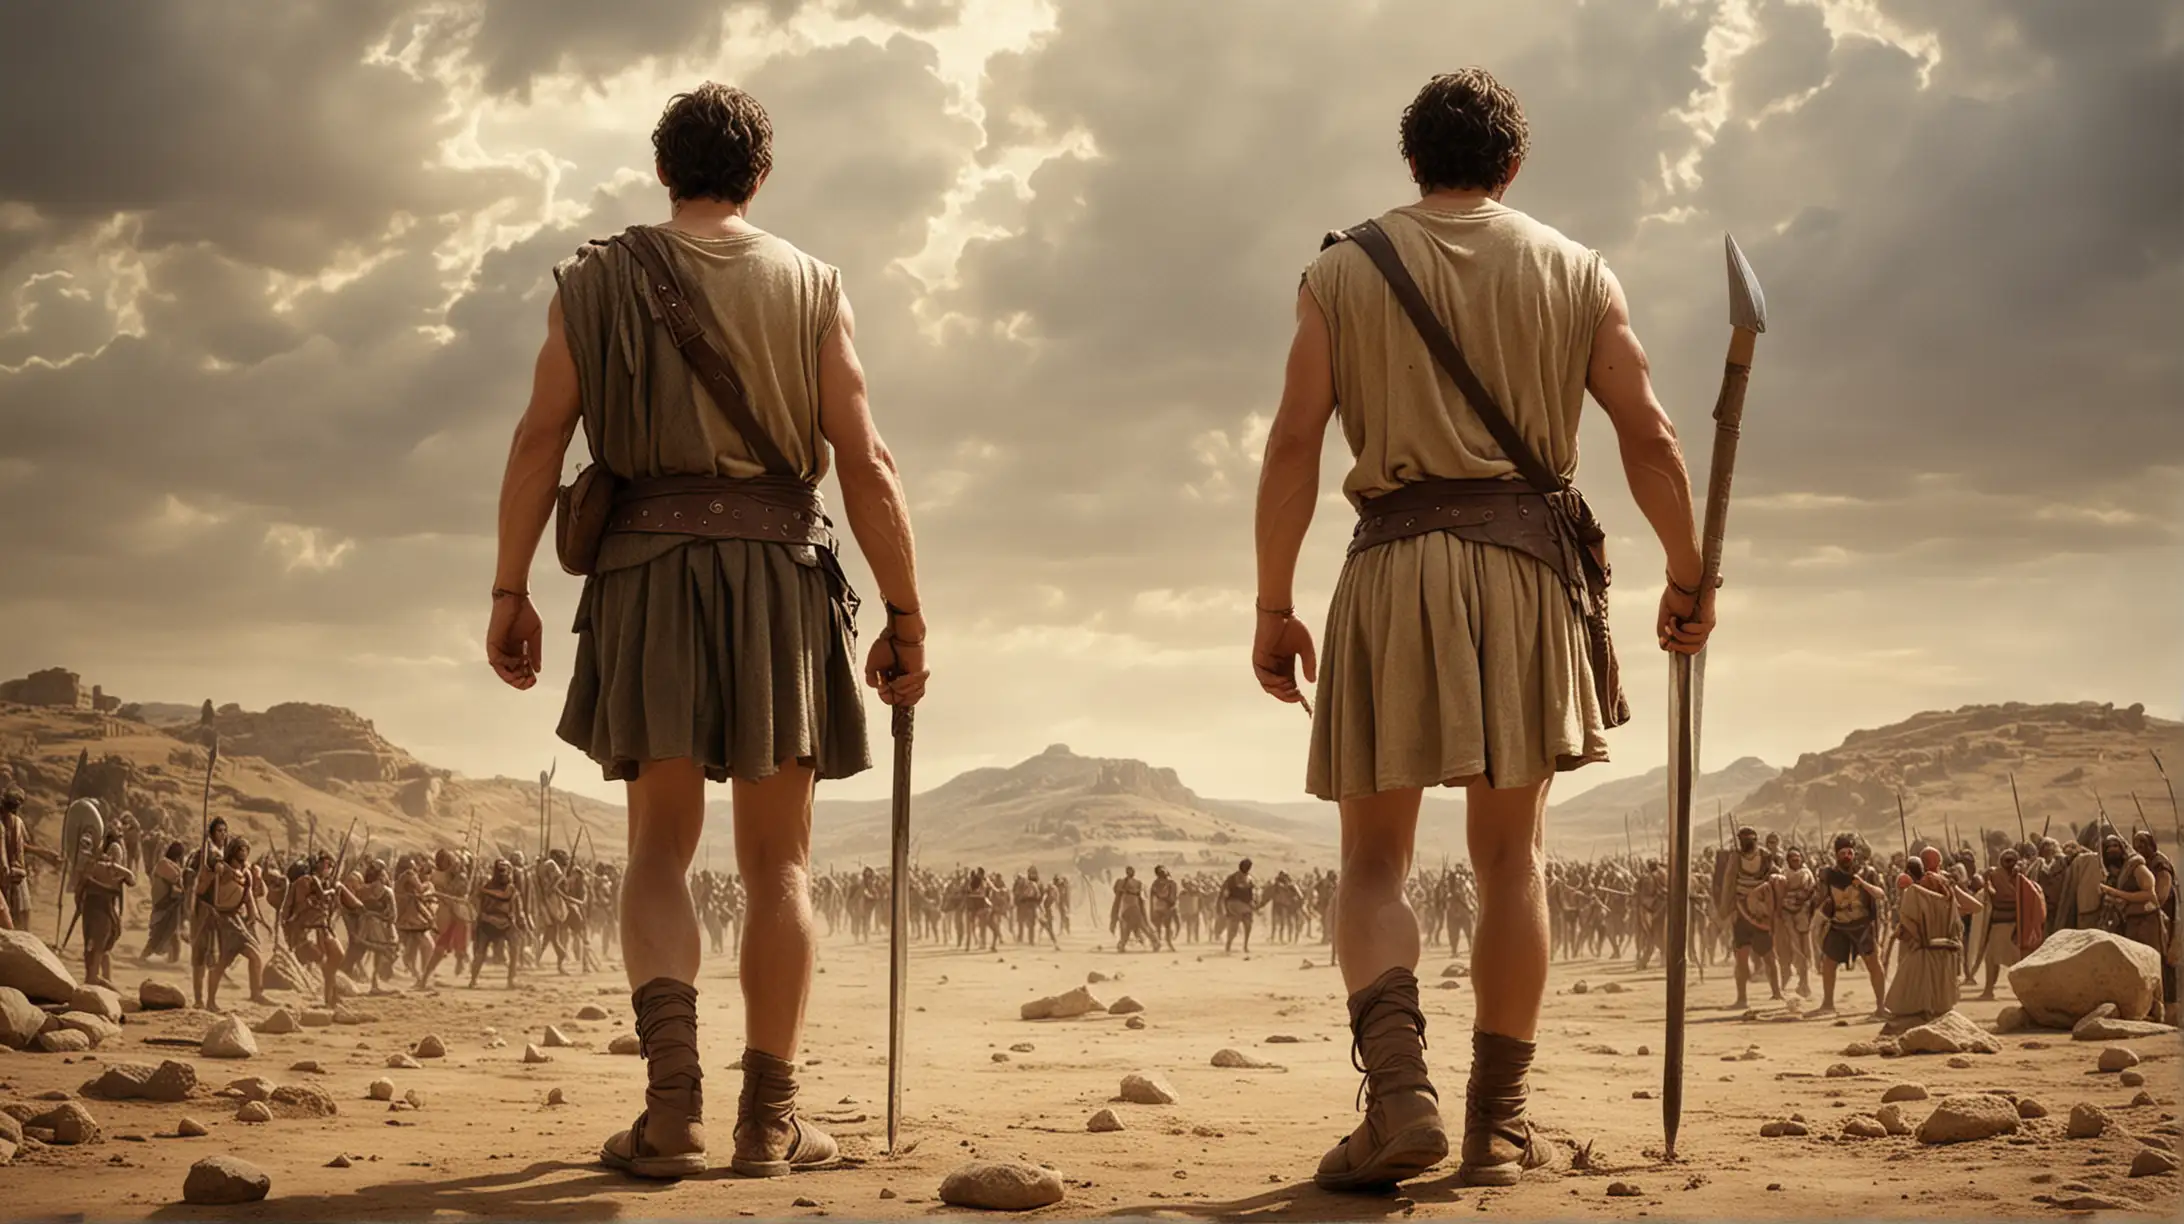 An image that encompasses the Story of the Biblical characters of David & Goliath